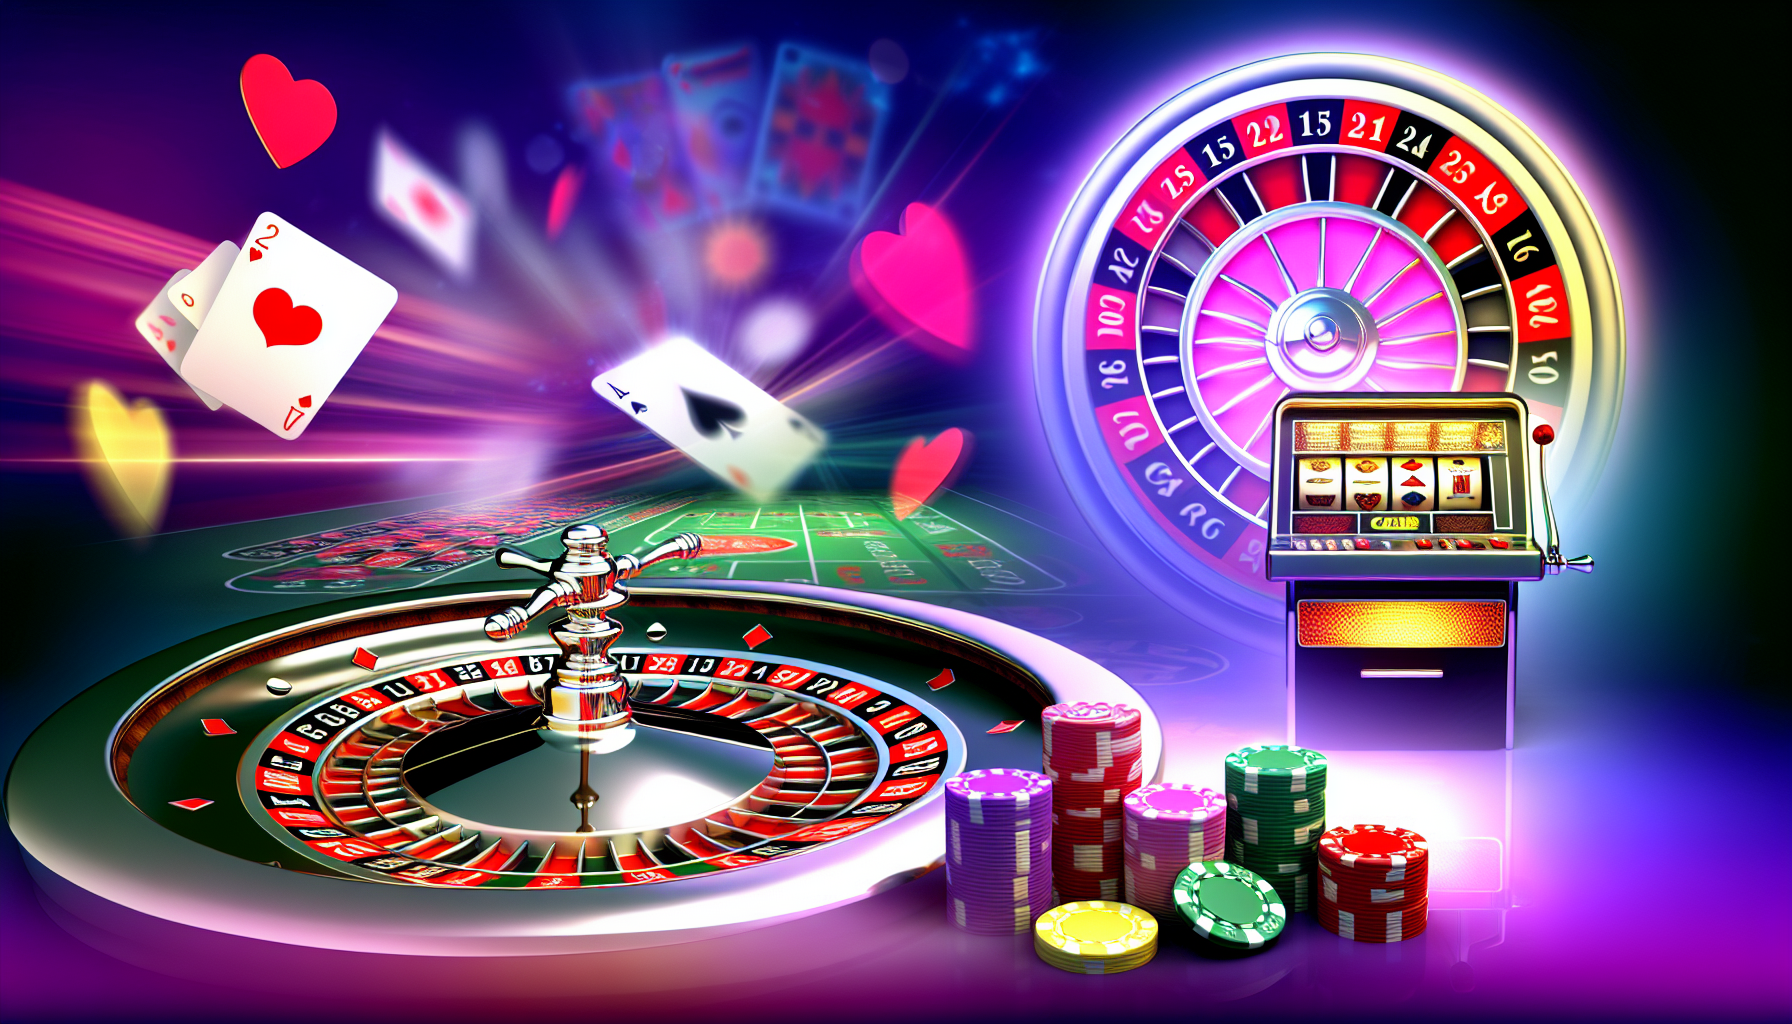 Top-rated online casinos